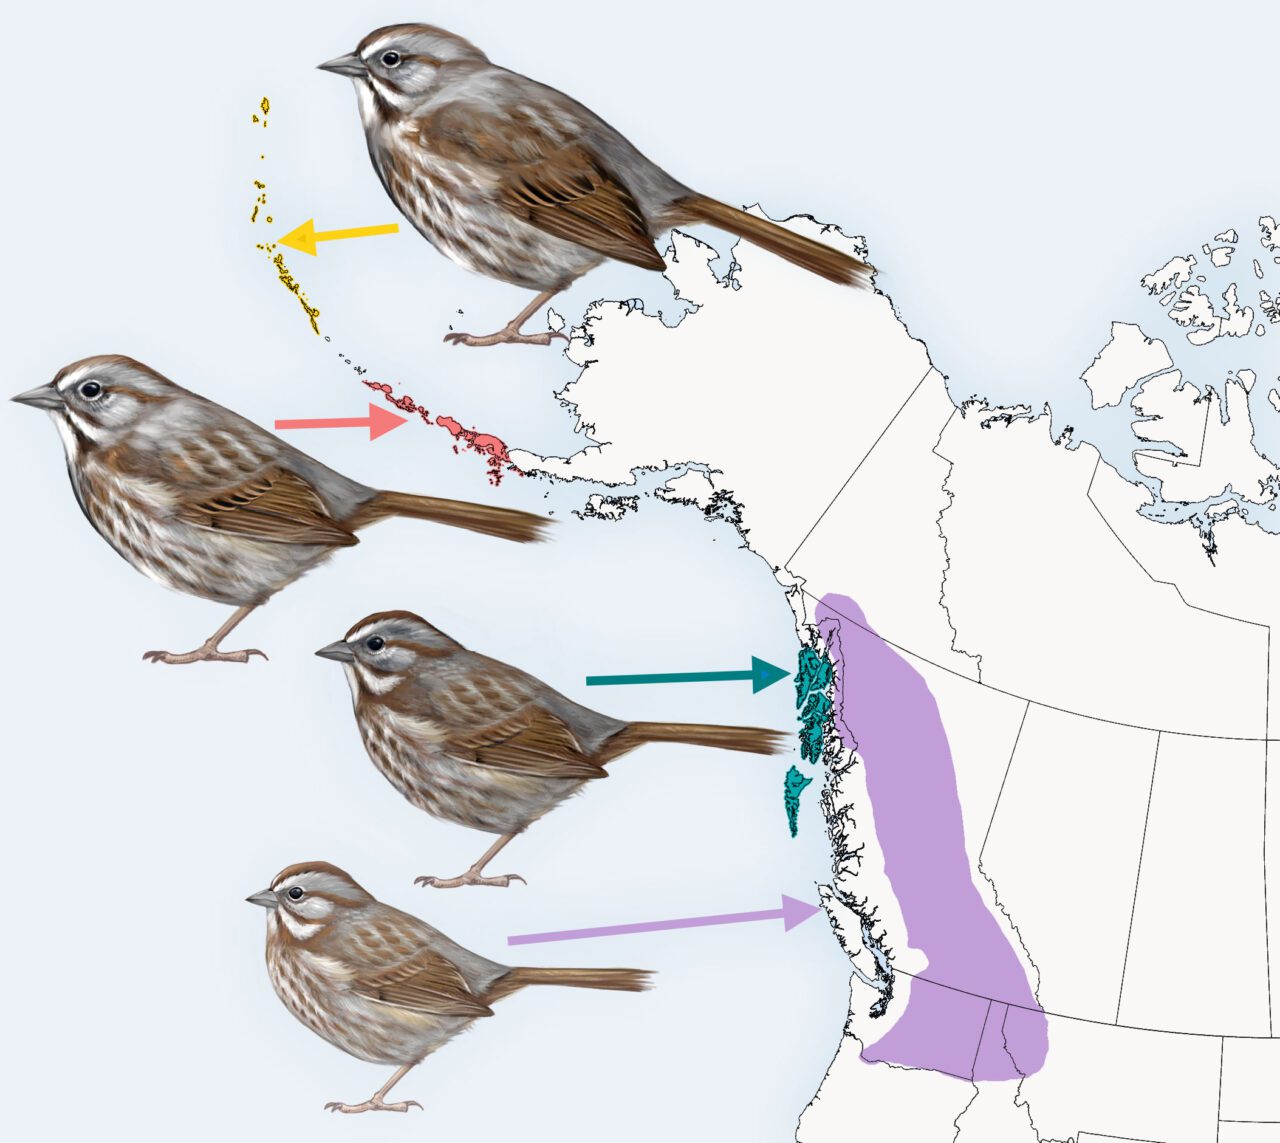 Map of the Northwest of North America with four illustrations of a species of Song Sparrow showing the difference in size compared to where the subspecies lives.